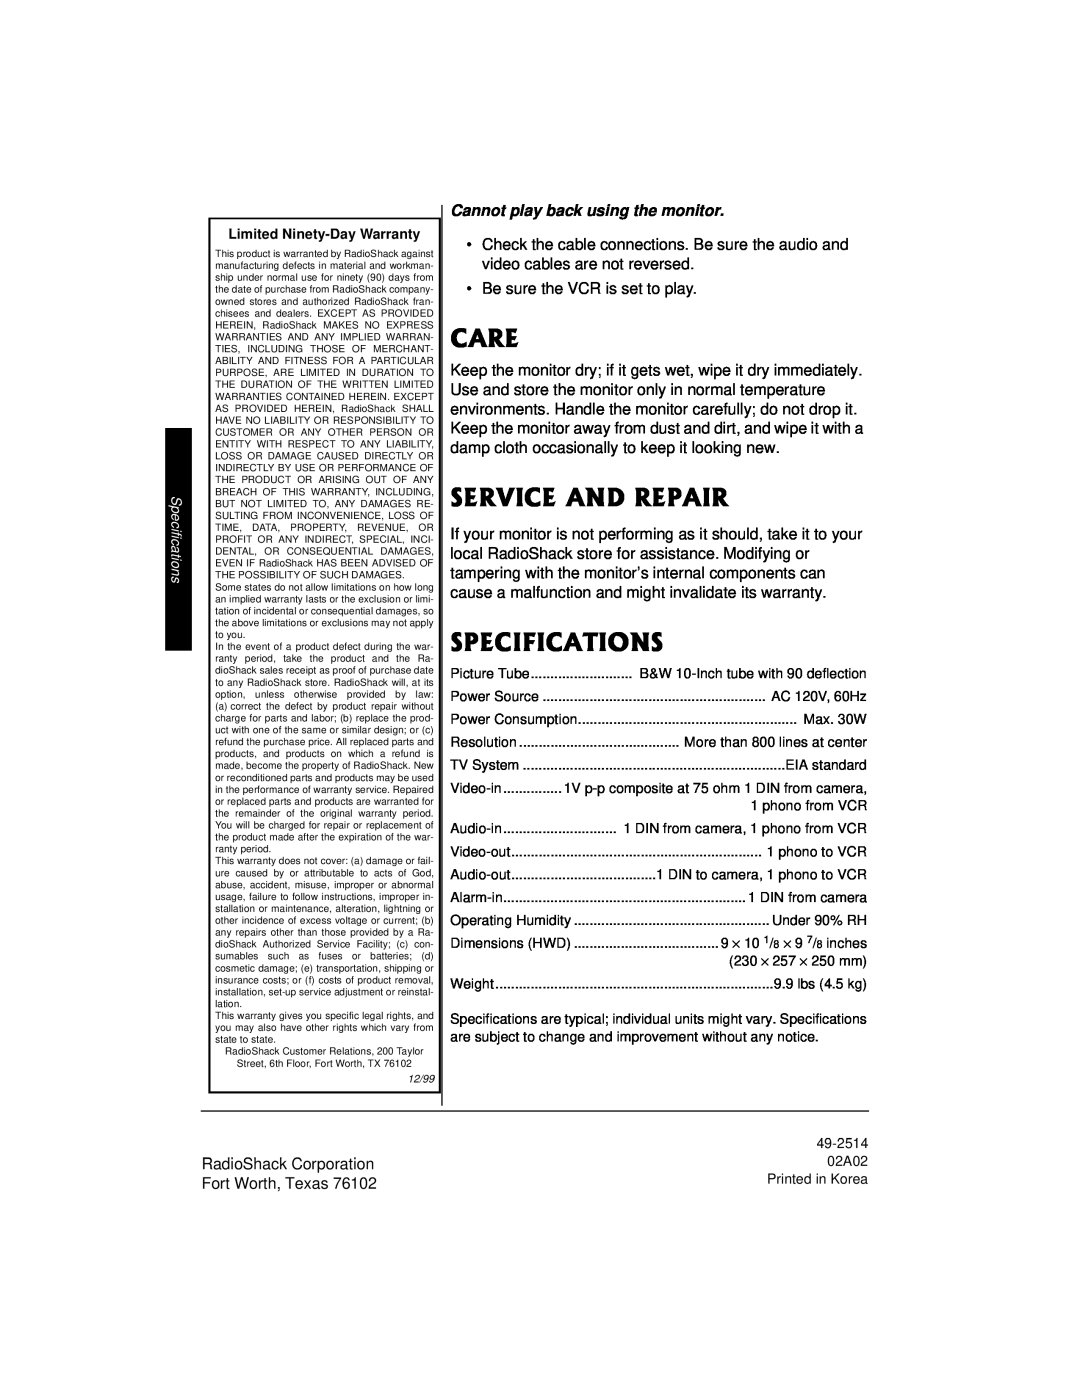 Radio Shack 49-2514 owner manual 548+%#0&42#+4, 52%++%#6+105, Cannot play back using the monitor, Specifications 